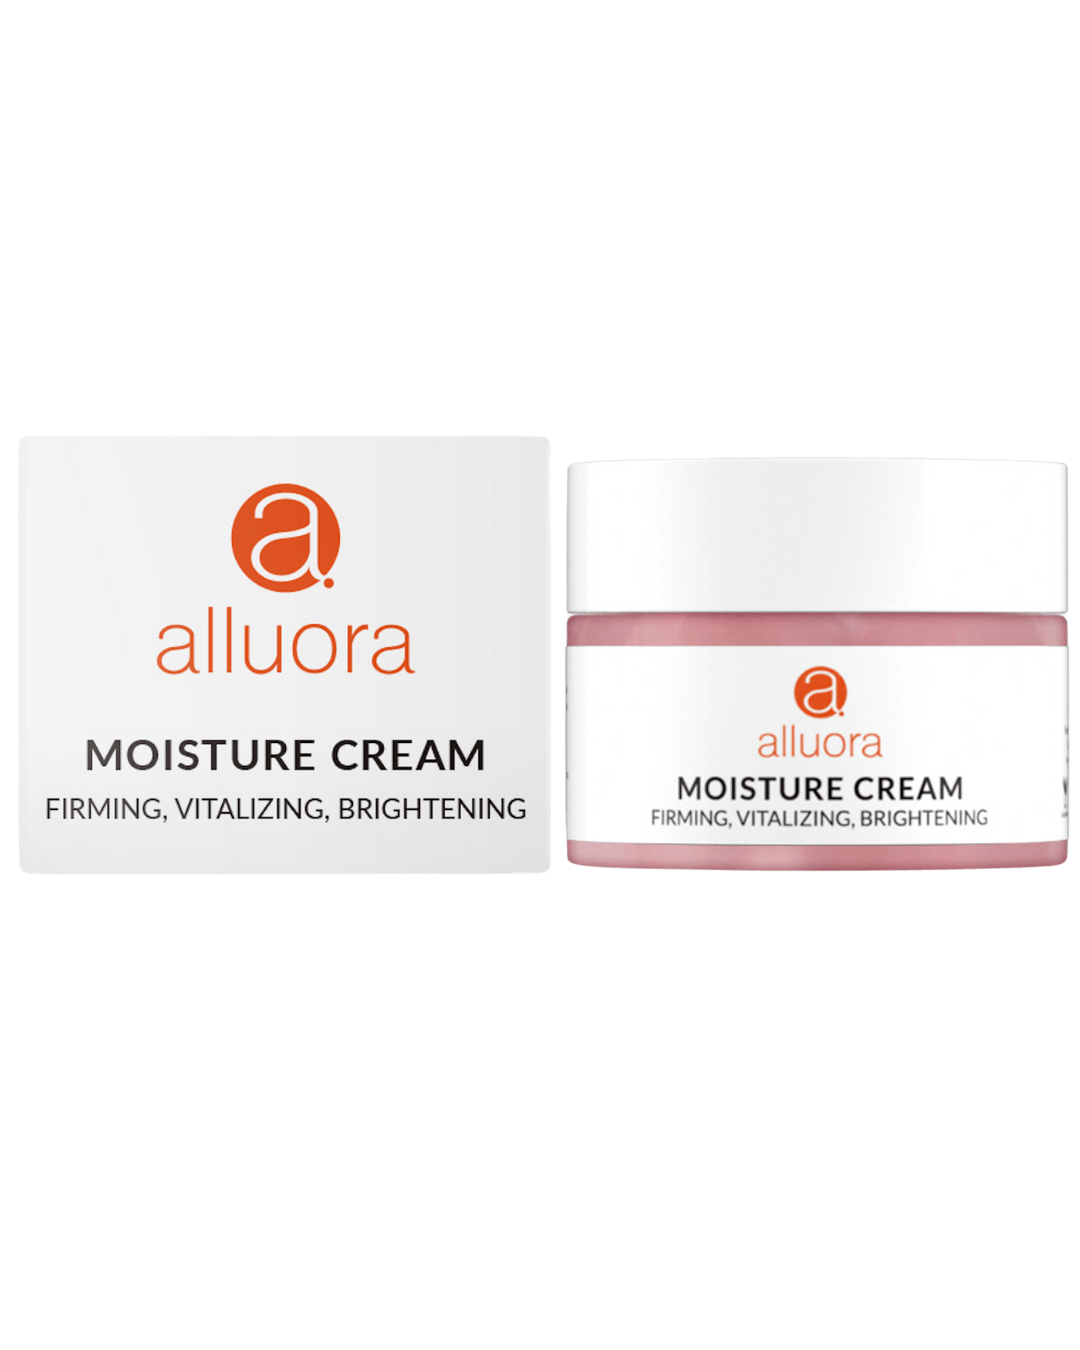 Daily Vanity Beauty Awards 2024 Best Skincare ALLUORA Moisture Cream Voted By Beauty Experts